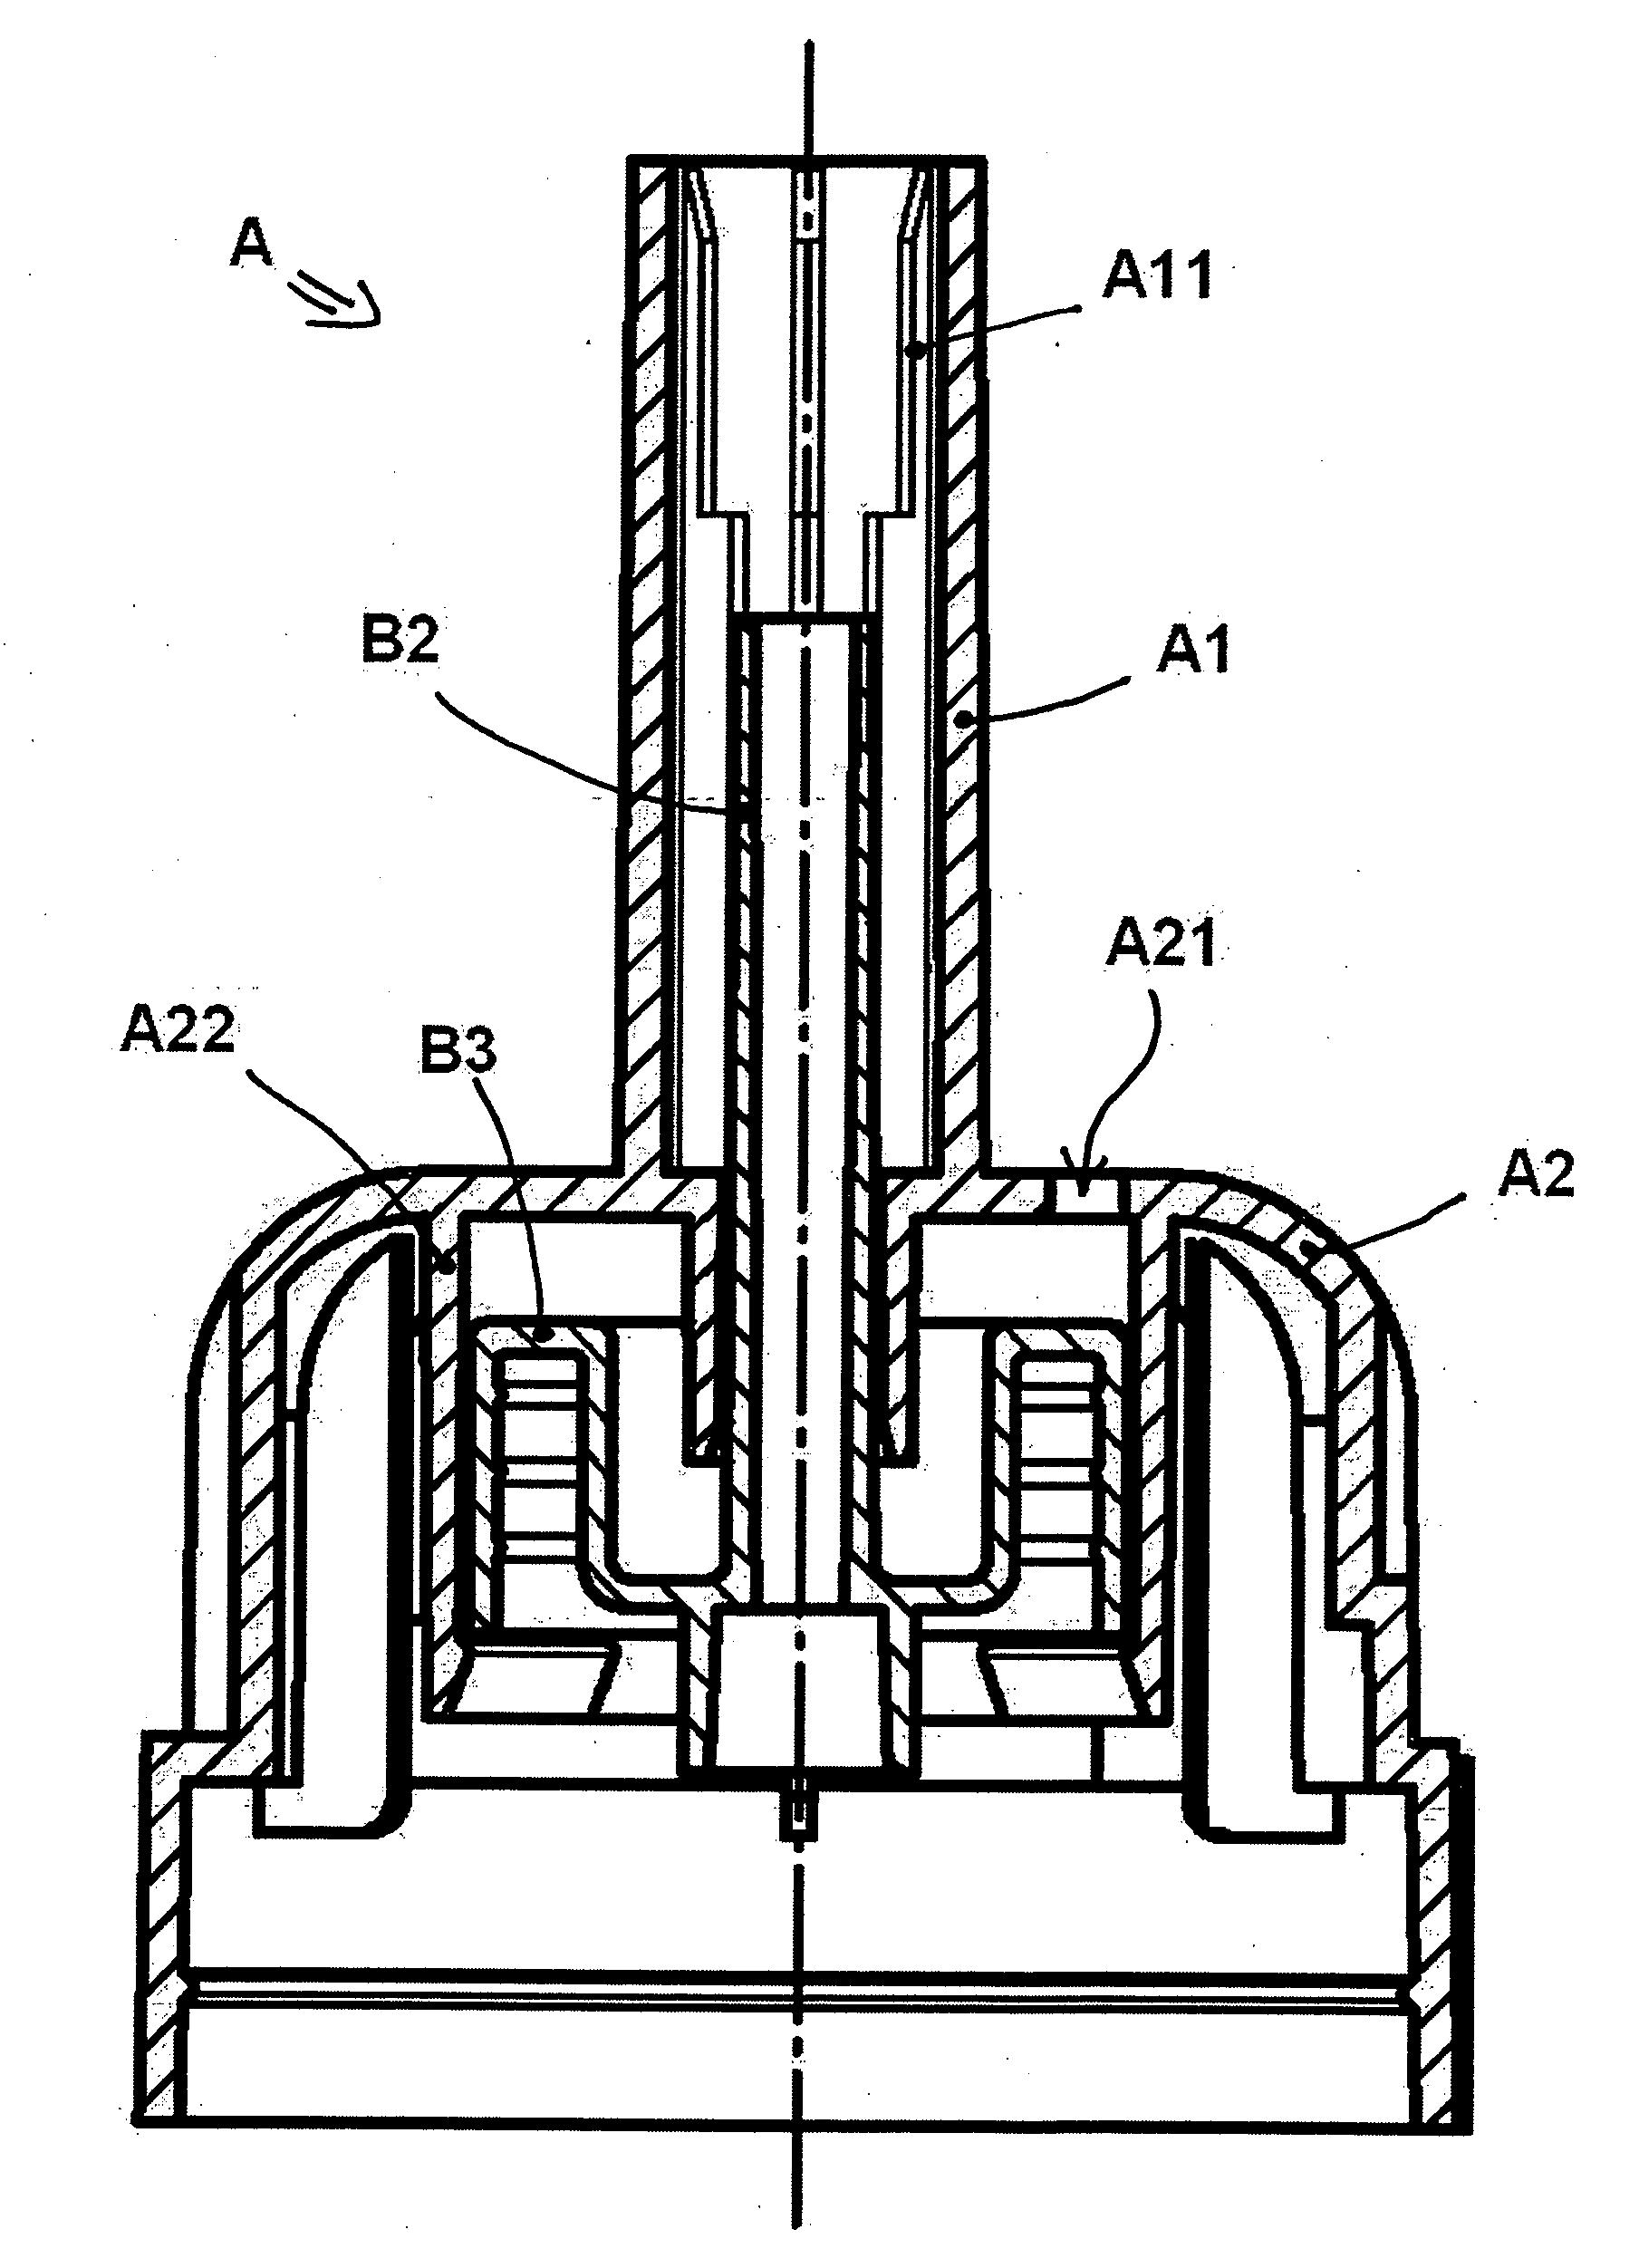 Dispensing device for pressurized containers for the application of cryogenic coolant